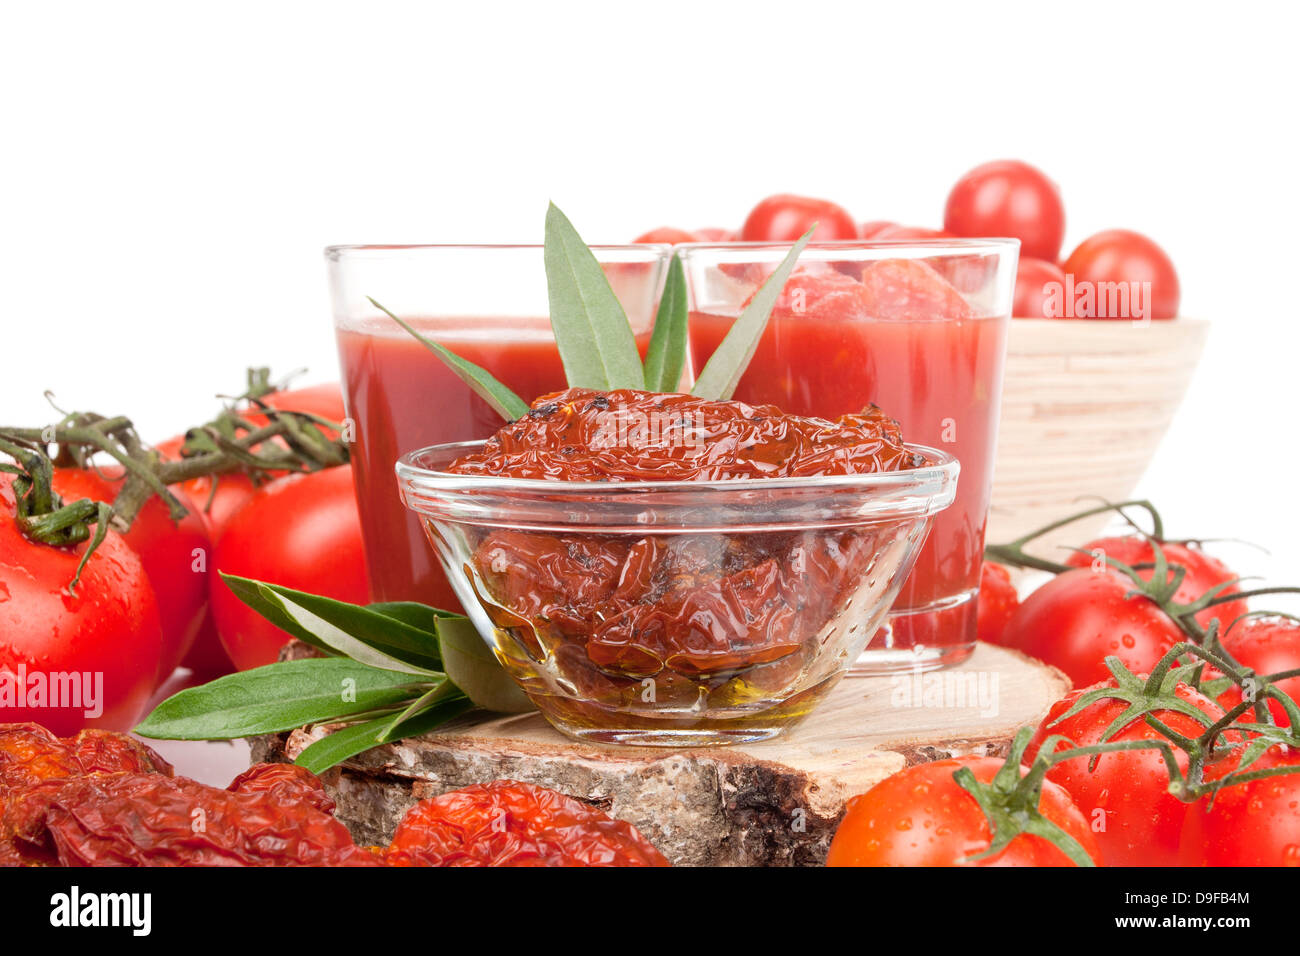 Different variations from tomatoes Different varieties of tomatoes Stock Photo